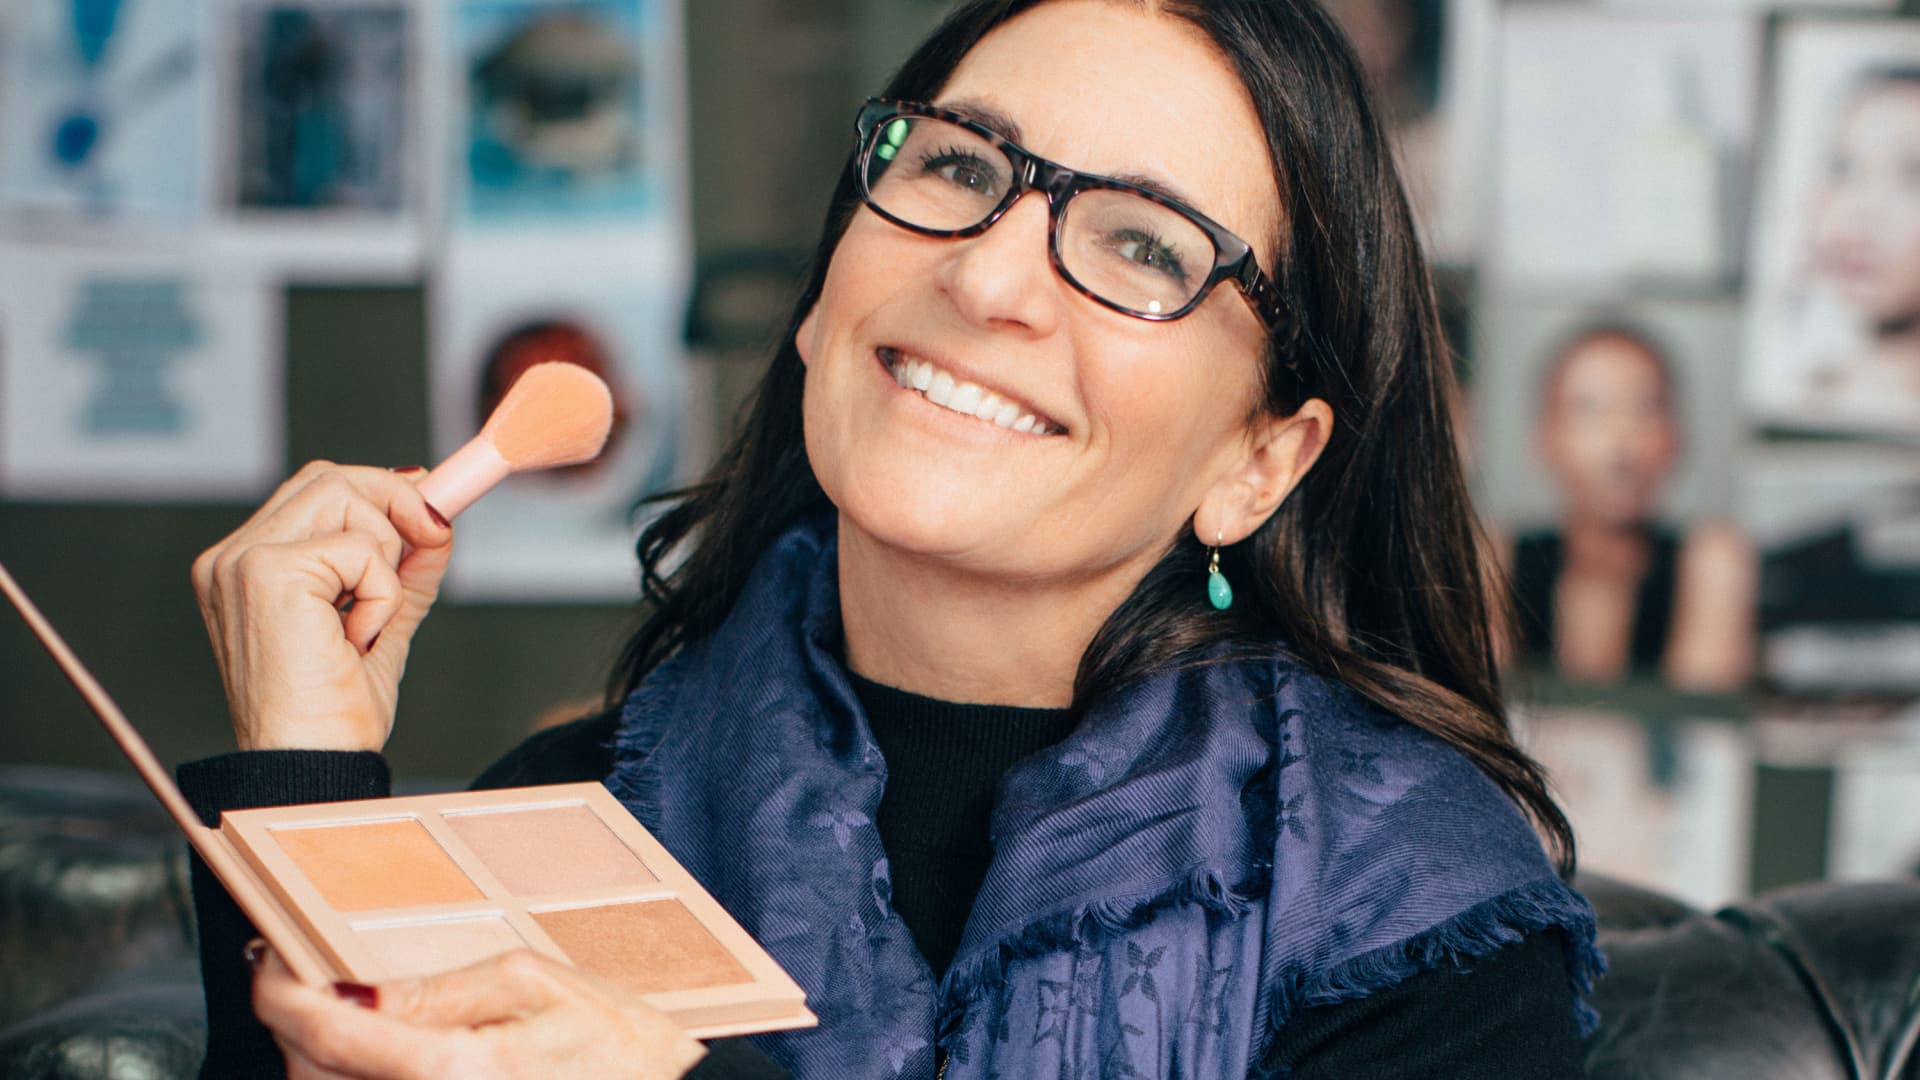 Bobbi Brown, who left her namesake cosmetics company in 2016, is now founder and CEO of Beauty Evolution and Jones Road Beauty.